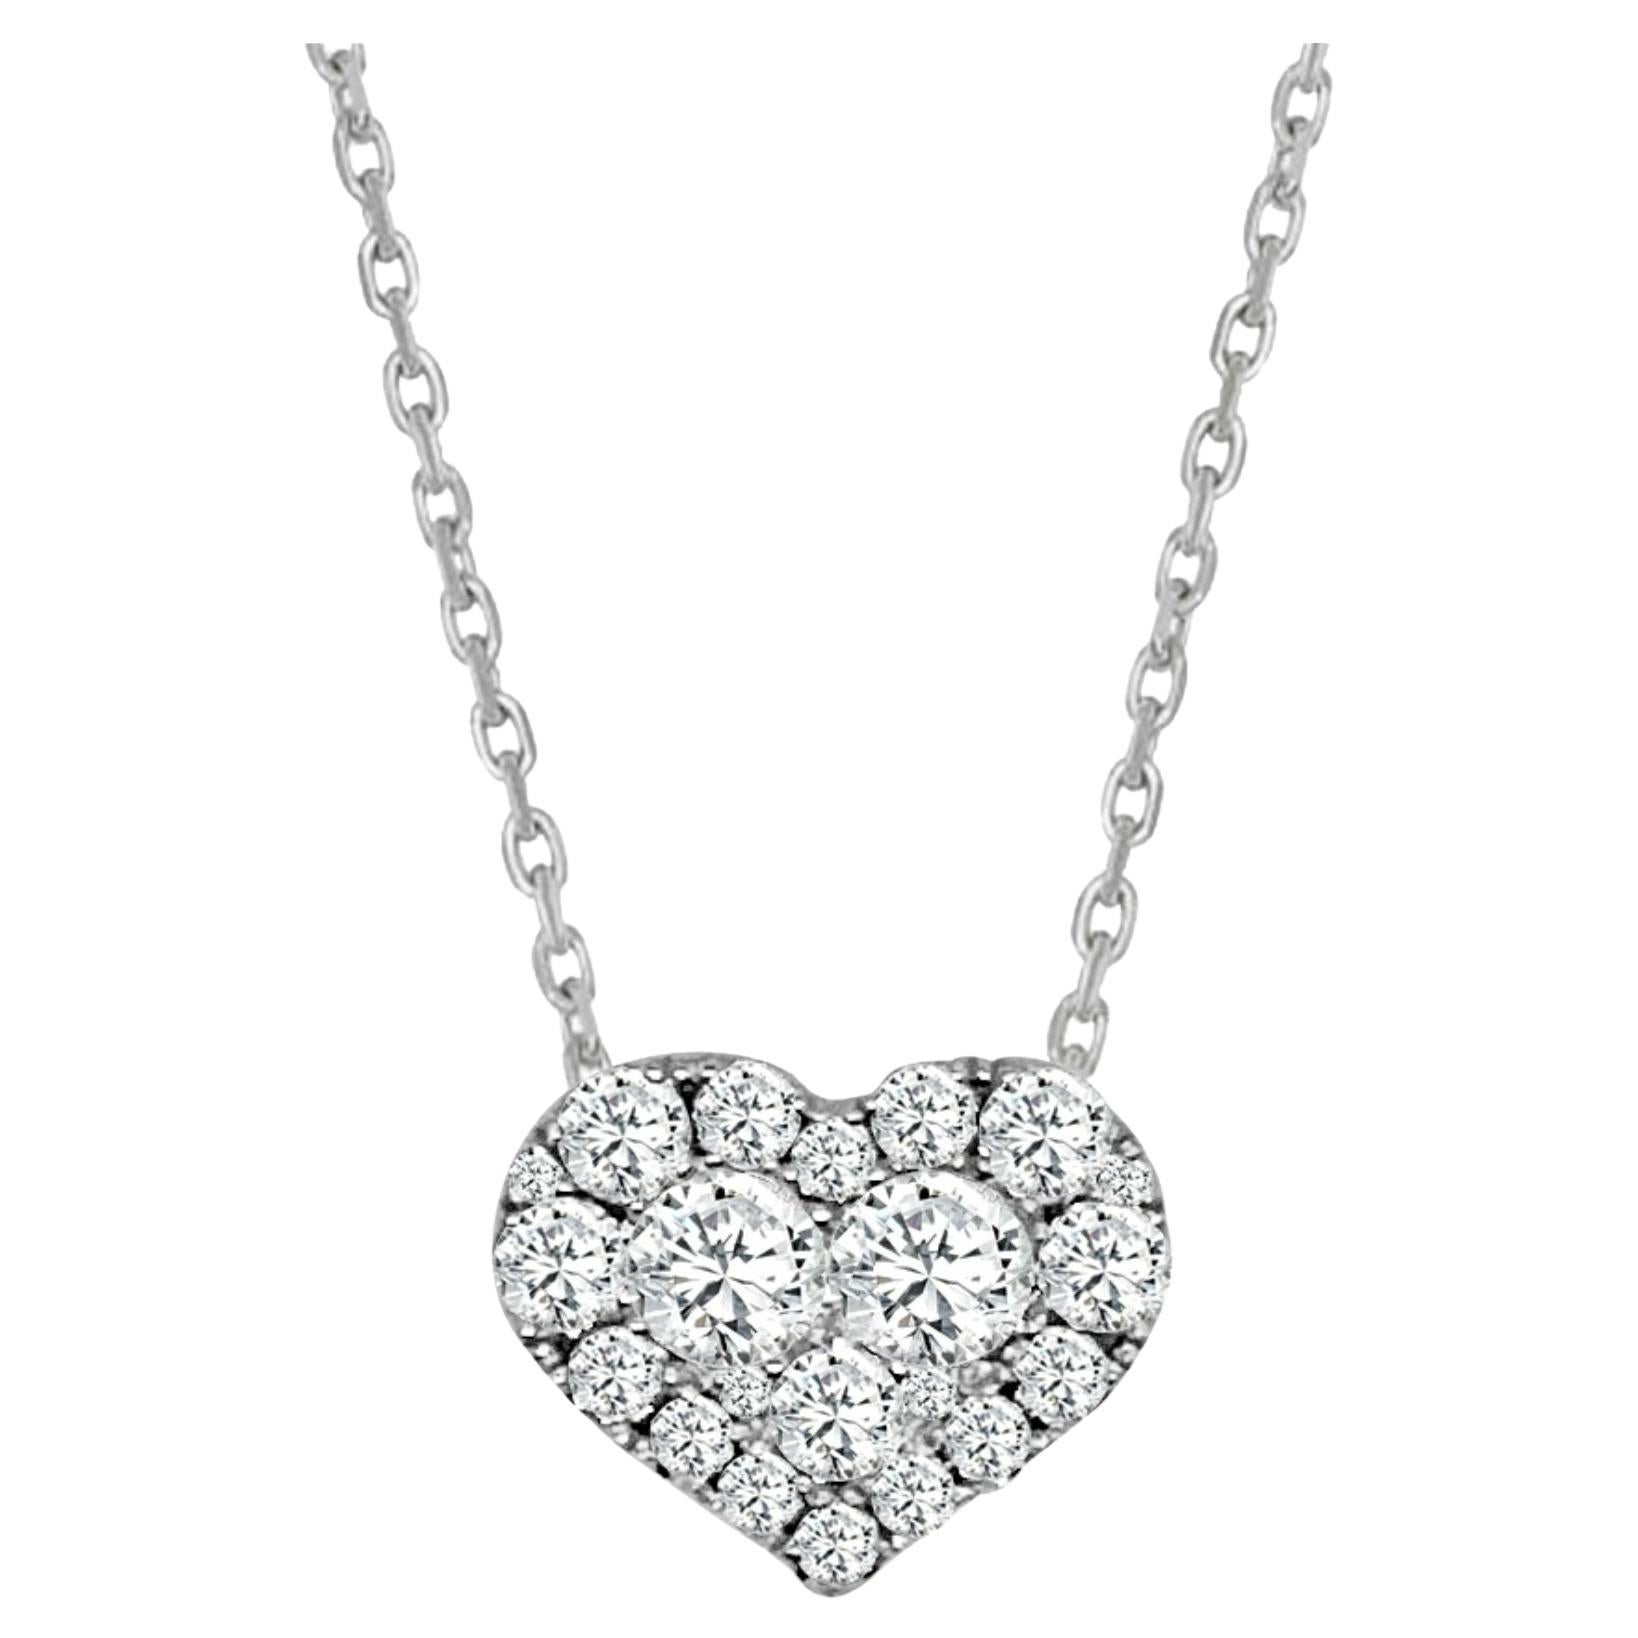 Pendant Necklace in 14k White Gold with Large Diamond Heart For Sale